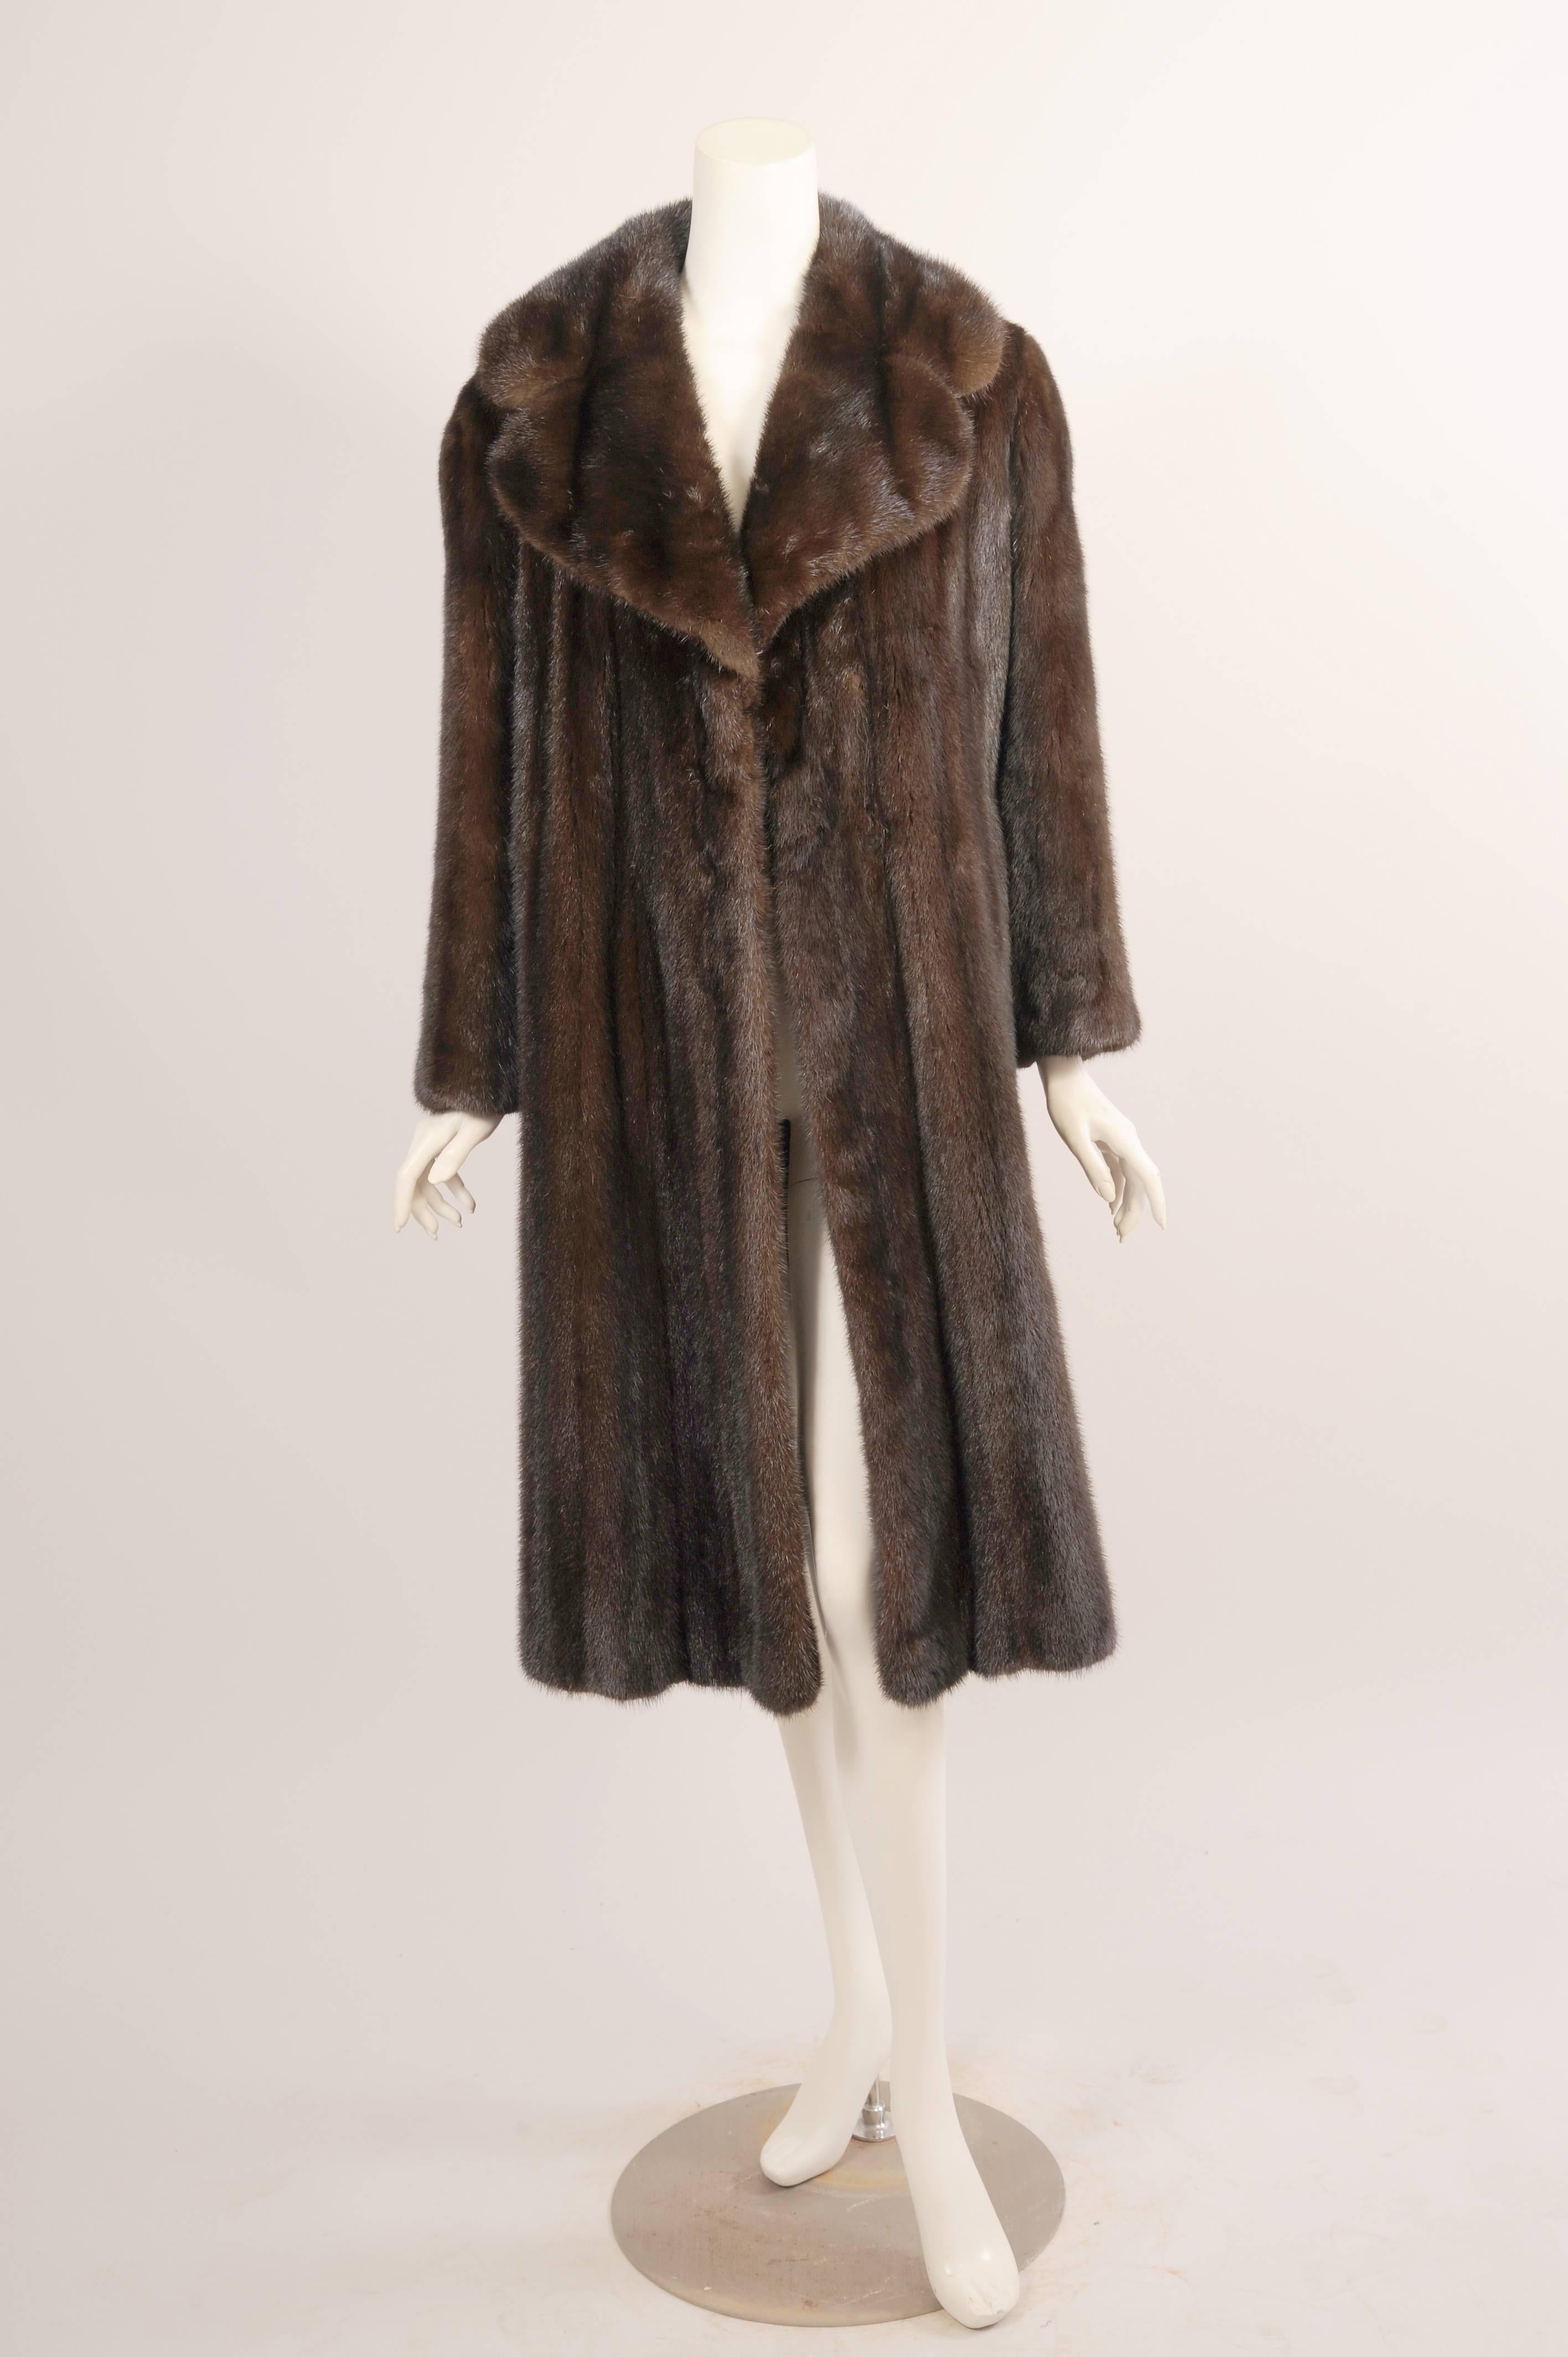 This gorgeous coat has a notched collar, concealed fur hooks, deep velvet lined pockets and a matching dark brown silk lining. The coat is in excellent condition. All measurements are taken on the outside of the coat while it is lying